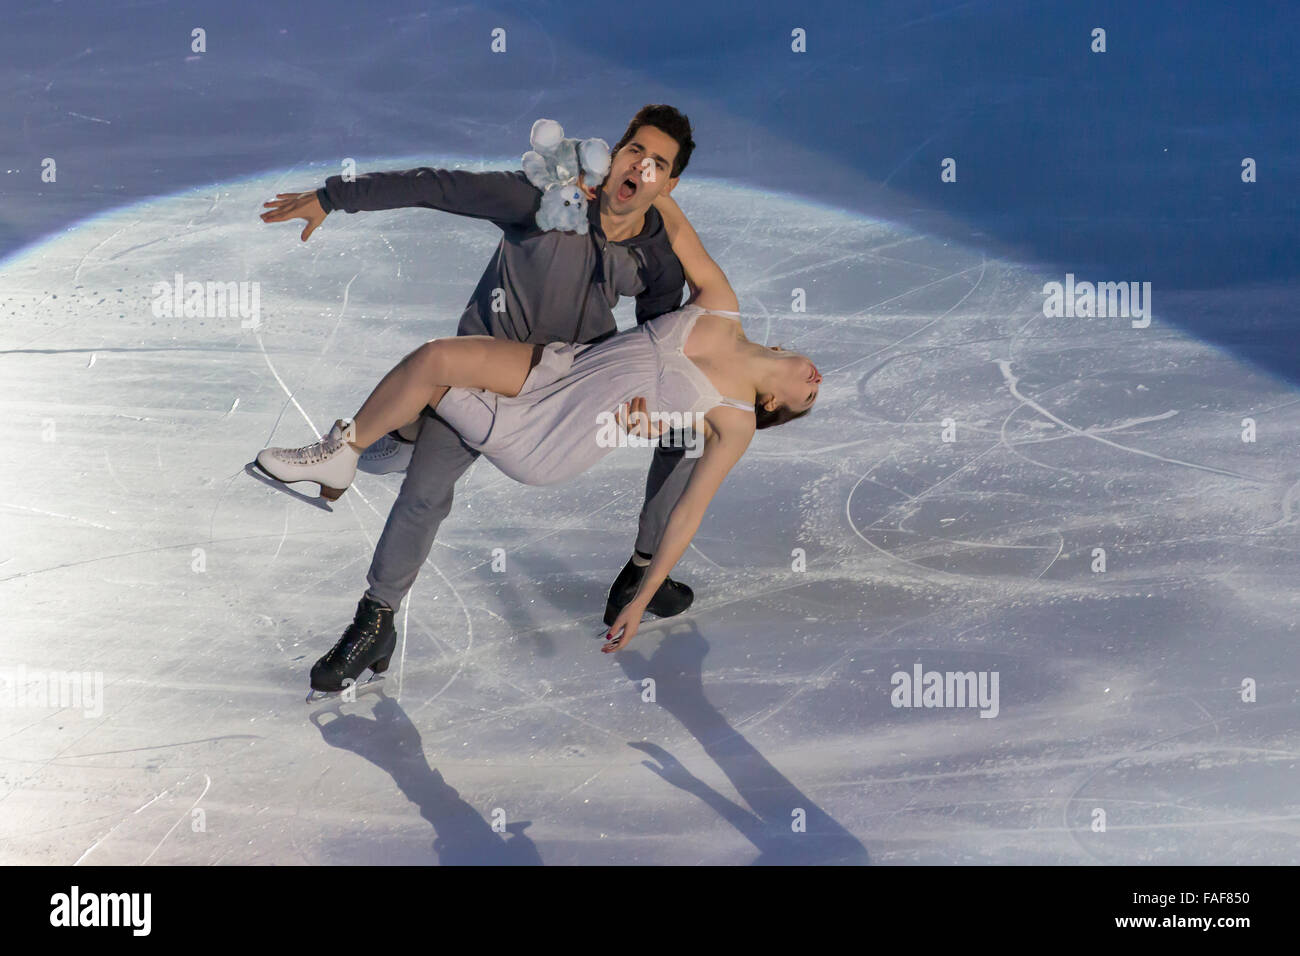 Anna Cappellini and Lucalanotte, Ice dance champions Stock Photo